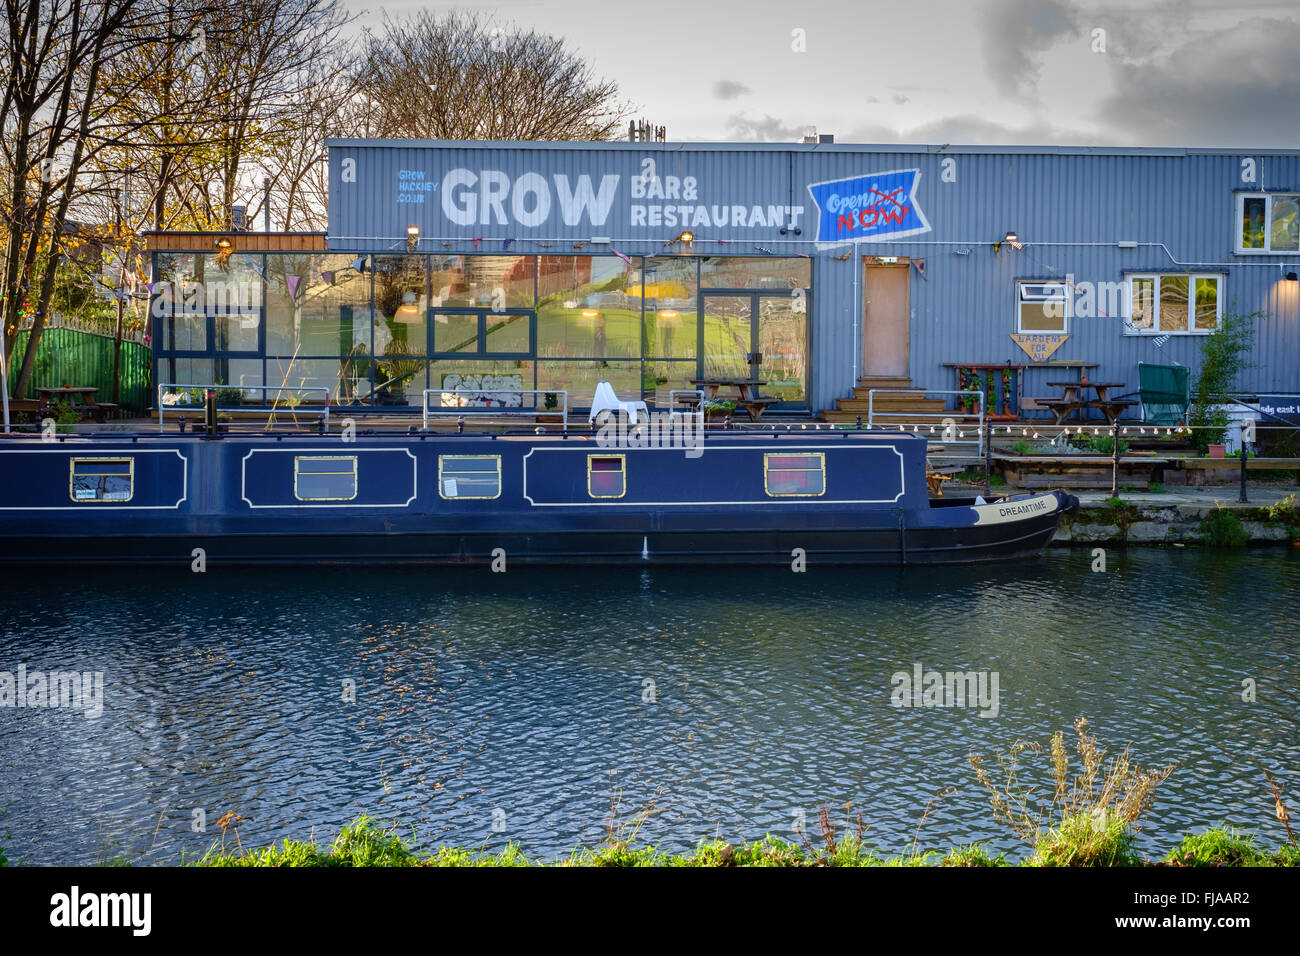 Grow bar and restaurant, Hackney Wick, Stratford, East London. Ethical, sustainable business, locally sourced and grown produce Stock Photo